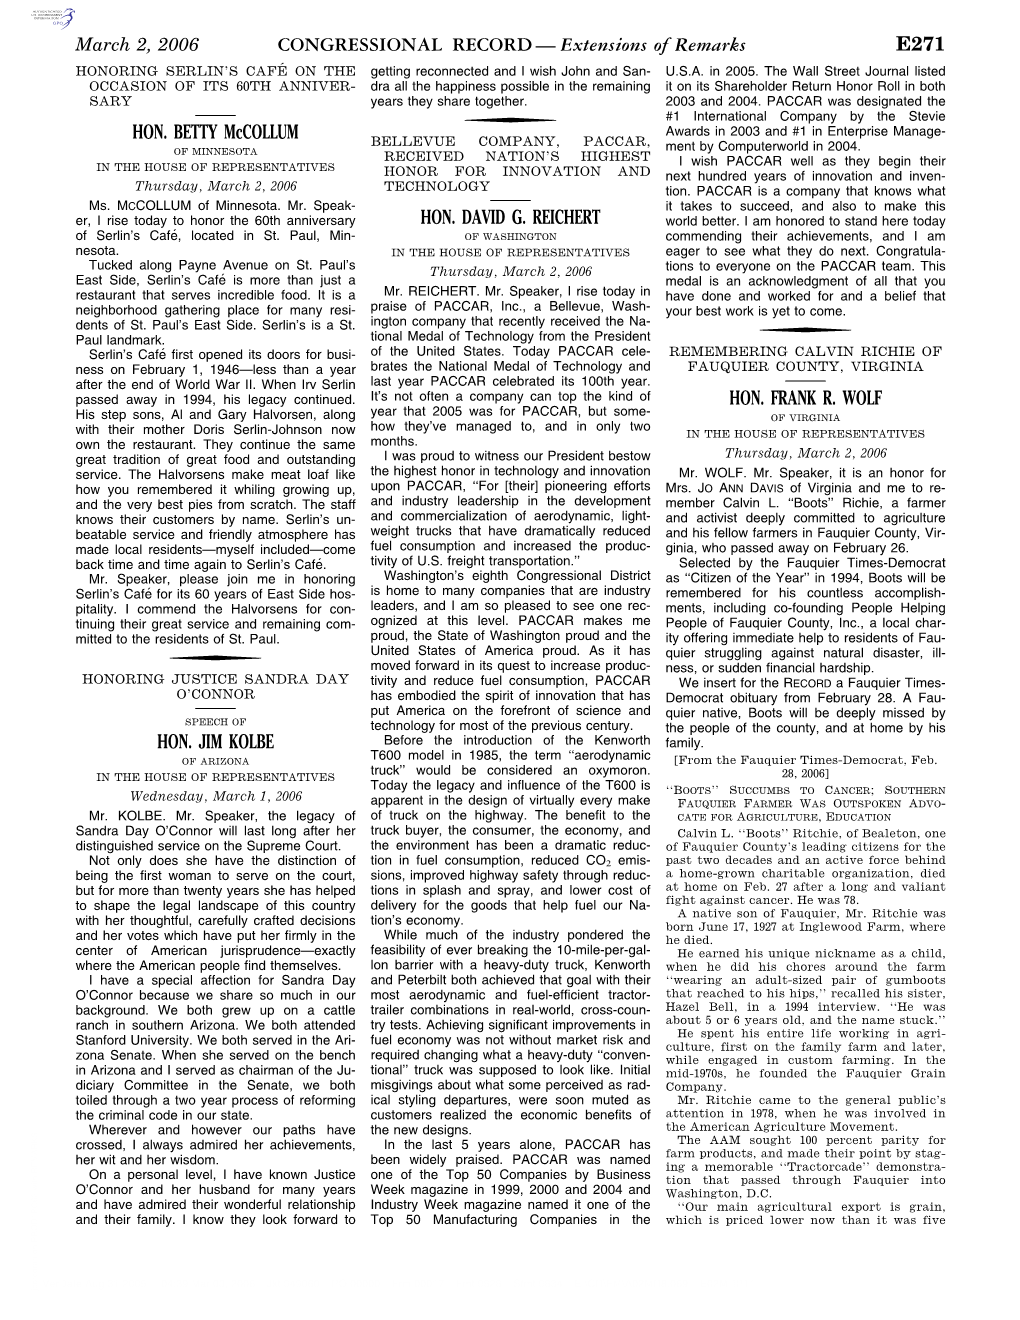 CONGRESSIONAL RECORD— Extensions of Remarks E271 HON